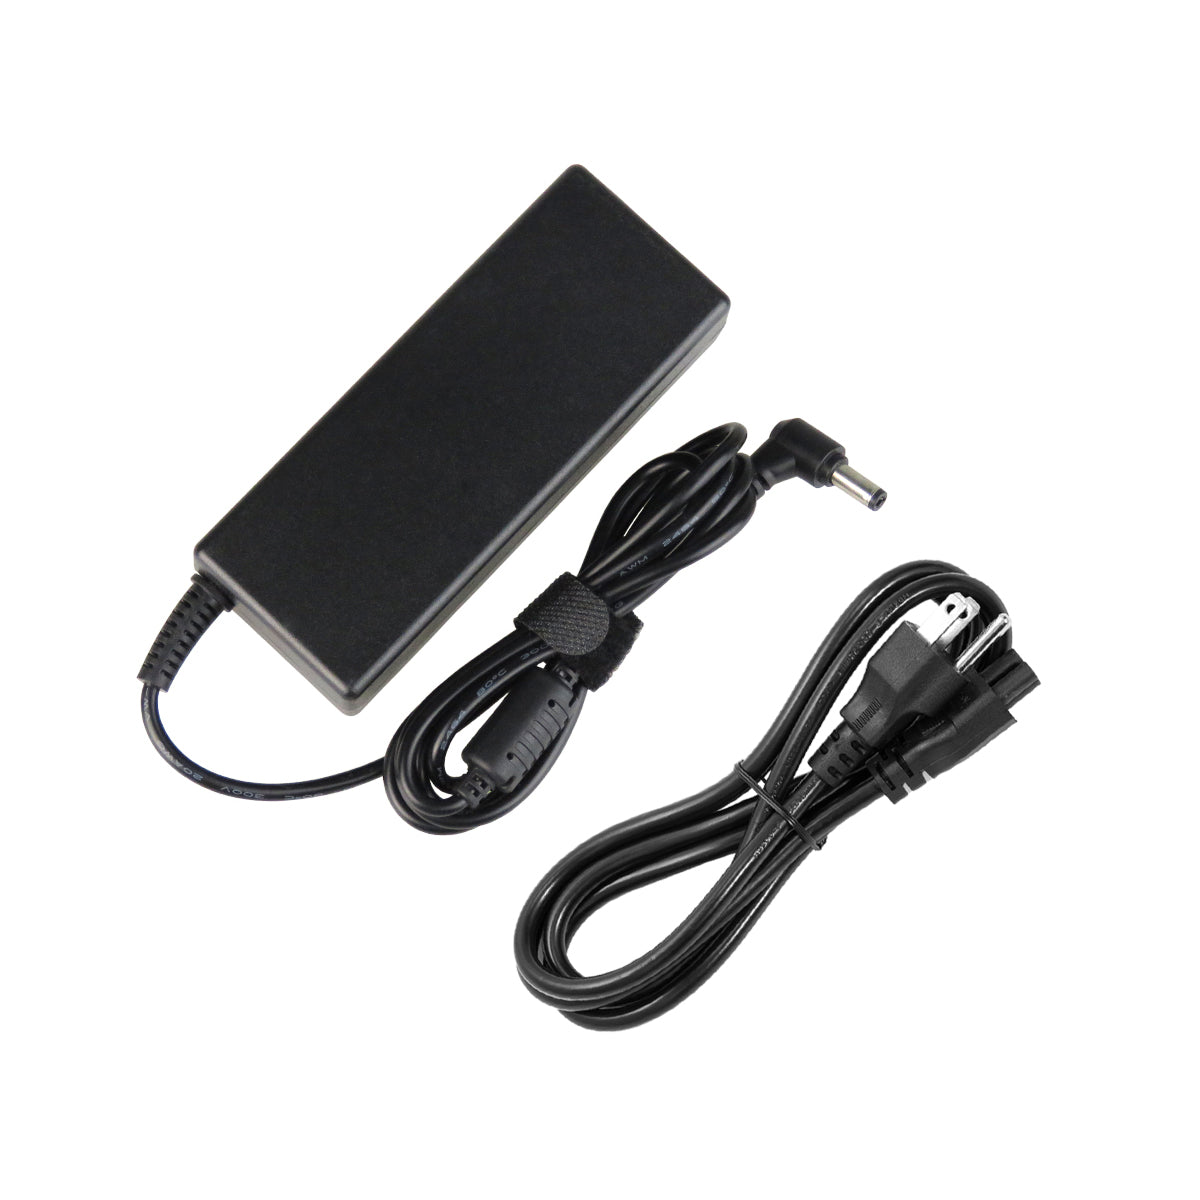 AC Adapter Charger for ASUS K53SJ Notebook.